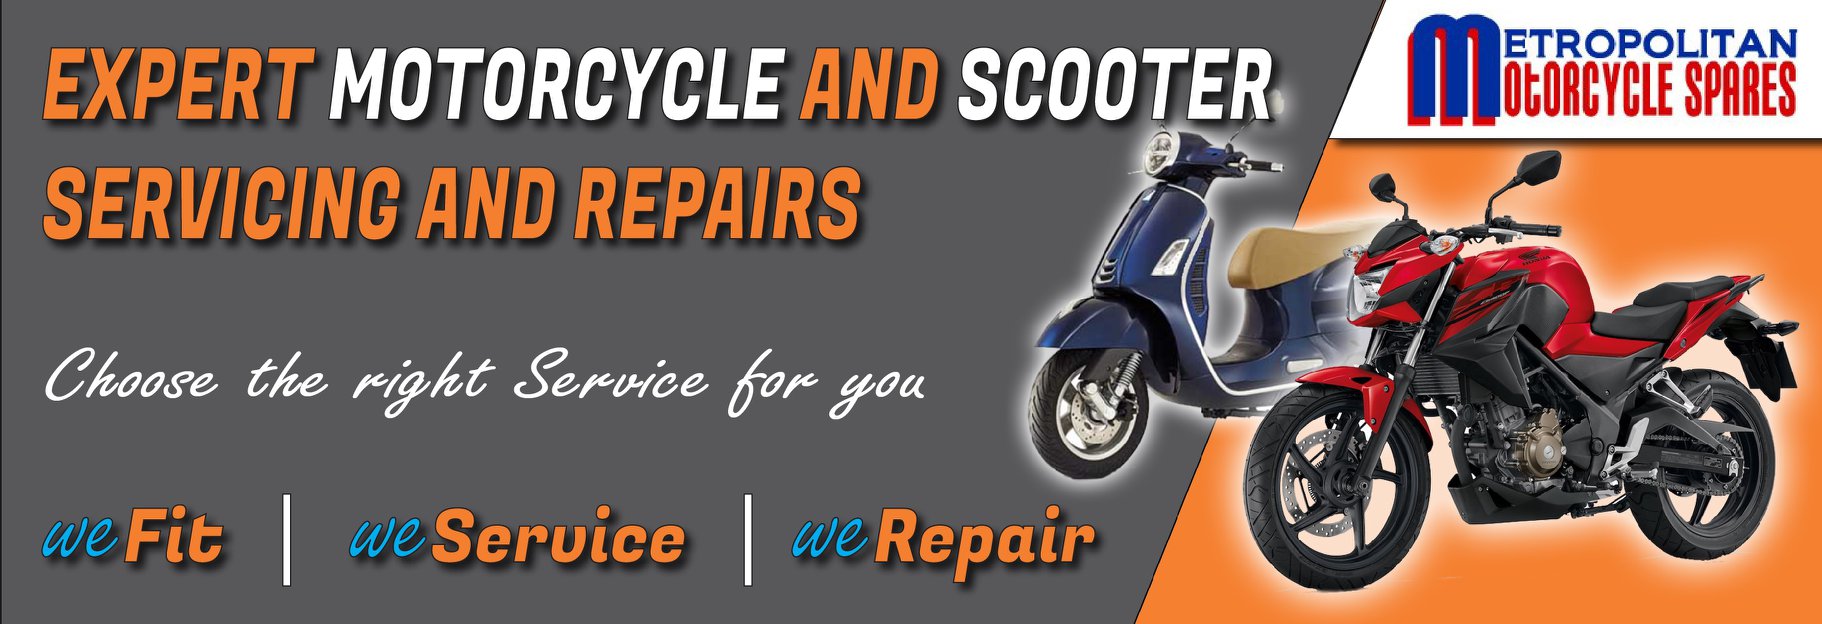 expert-motorcycle-and-scooter-servicing-and-repairs